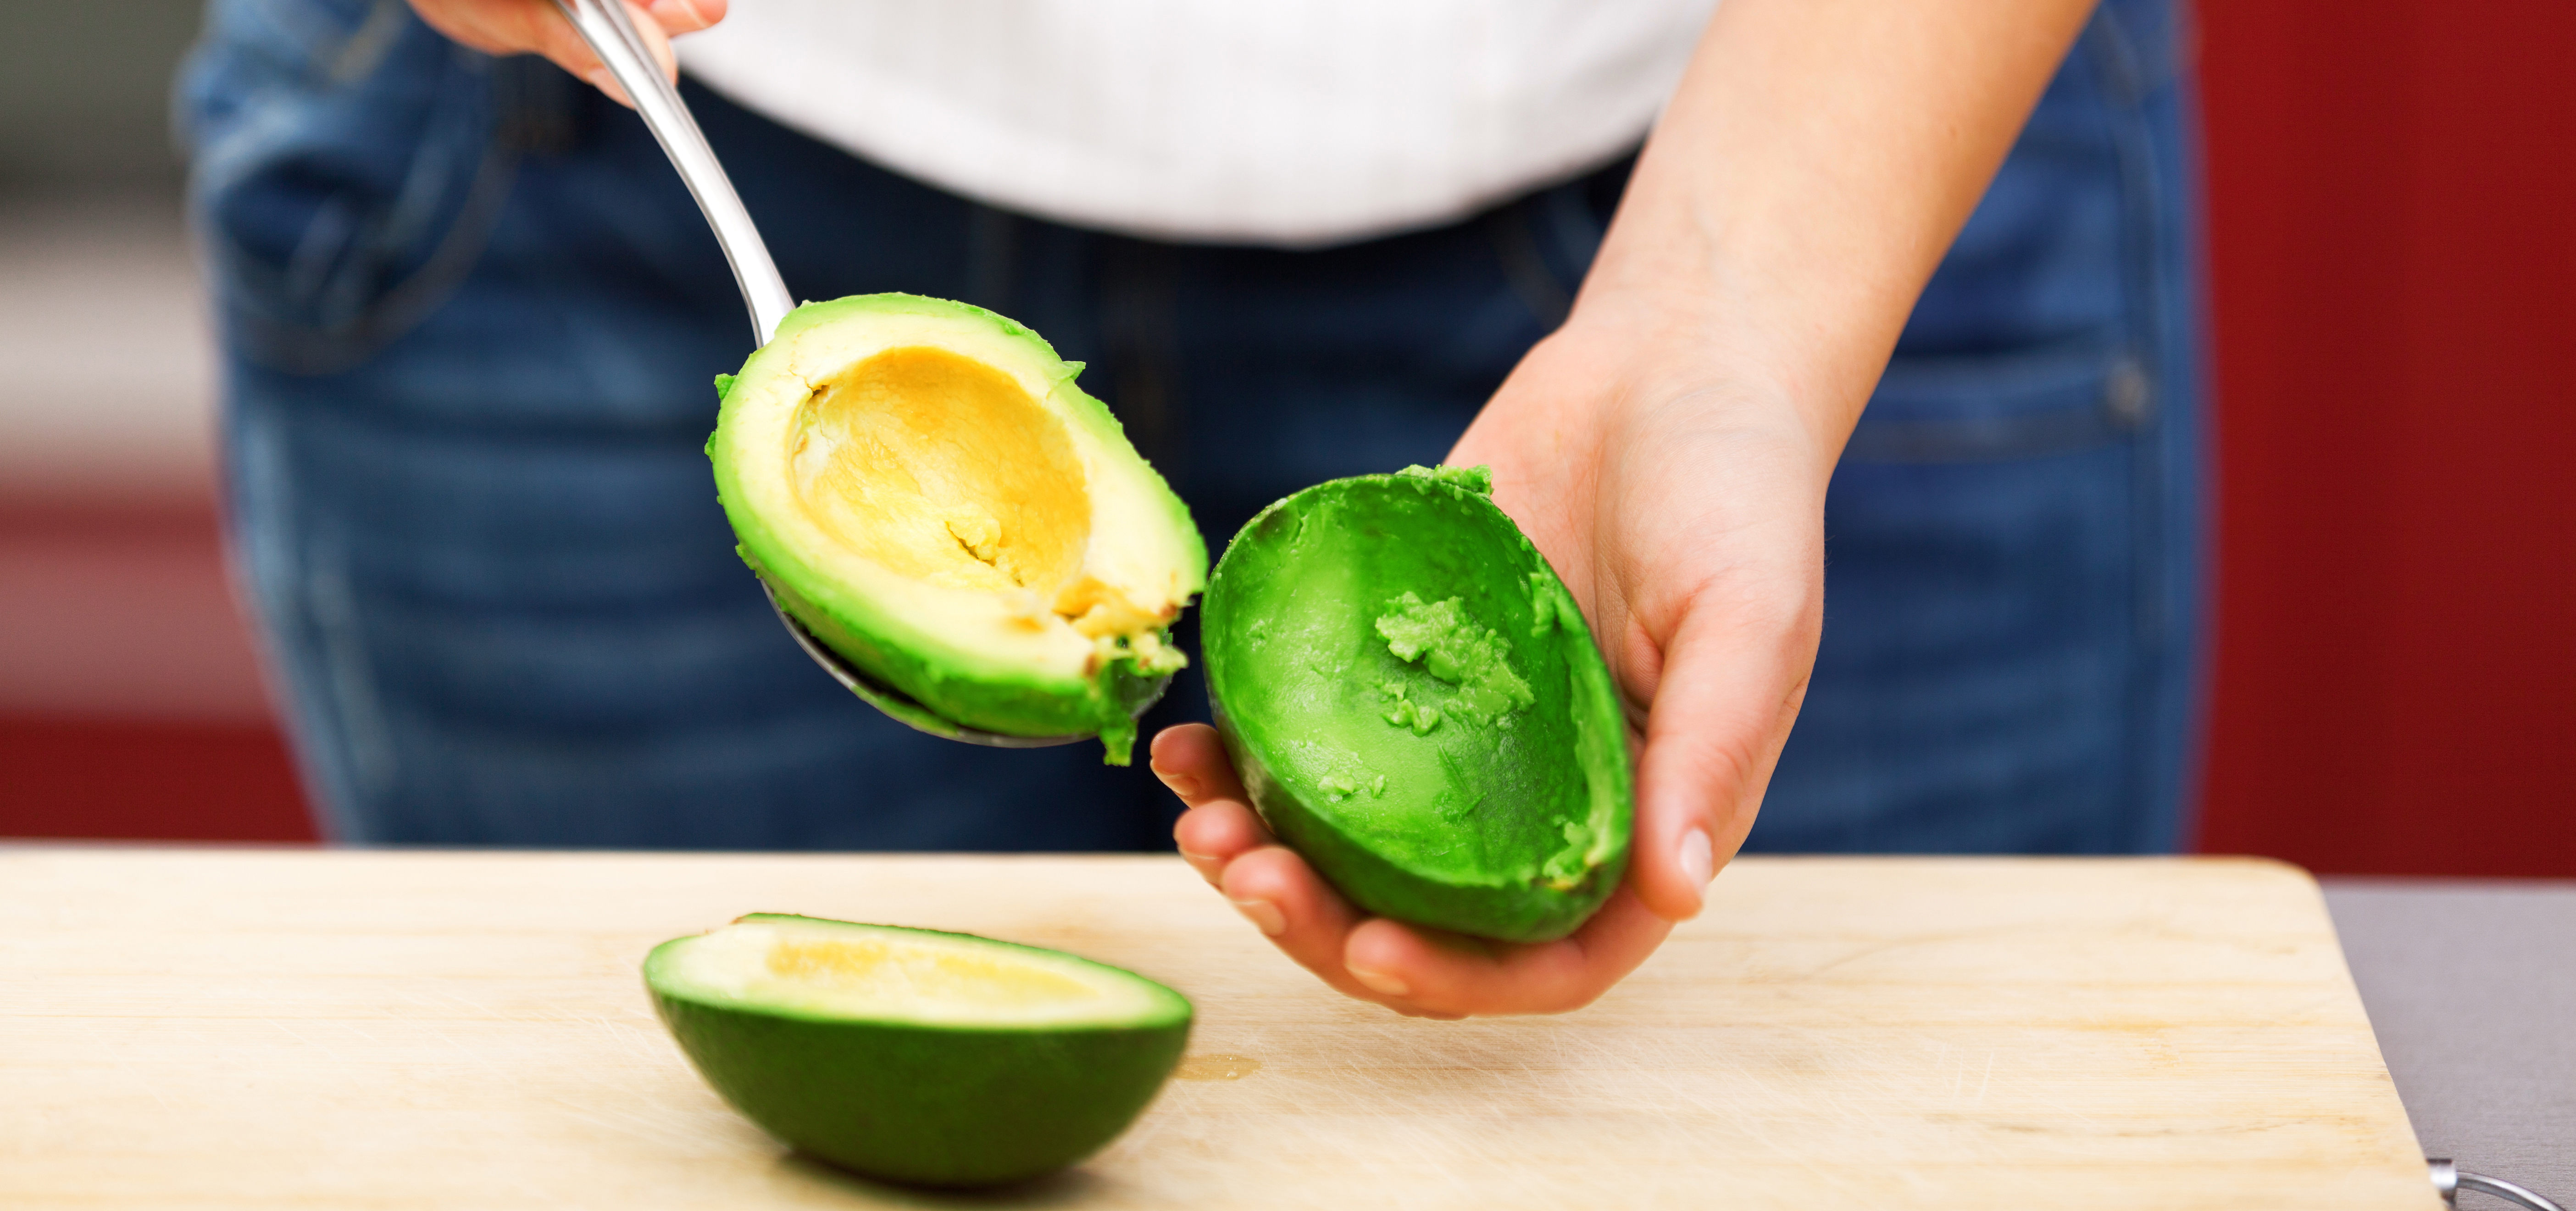 Image - Avocados change belly fat distribution in women, controlled study finds